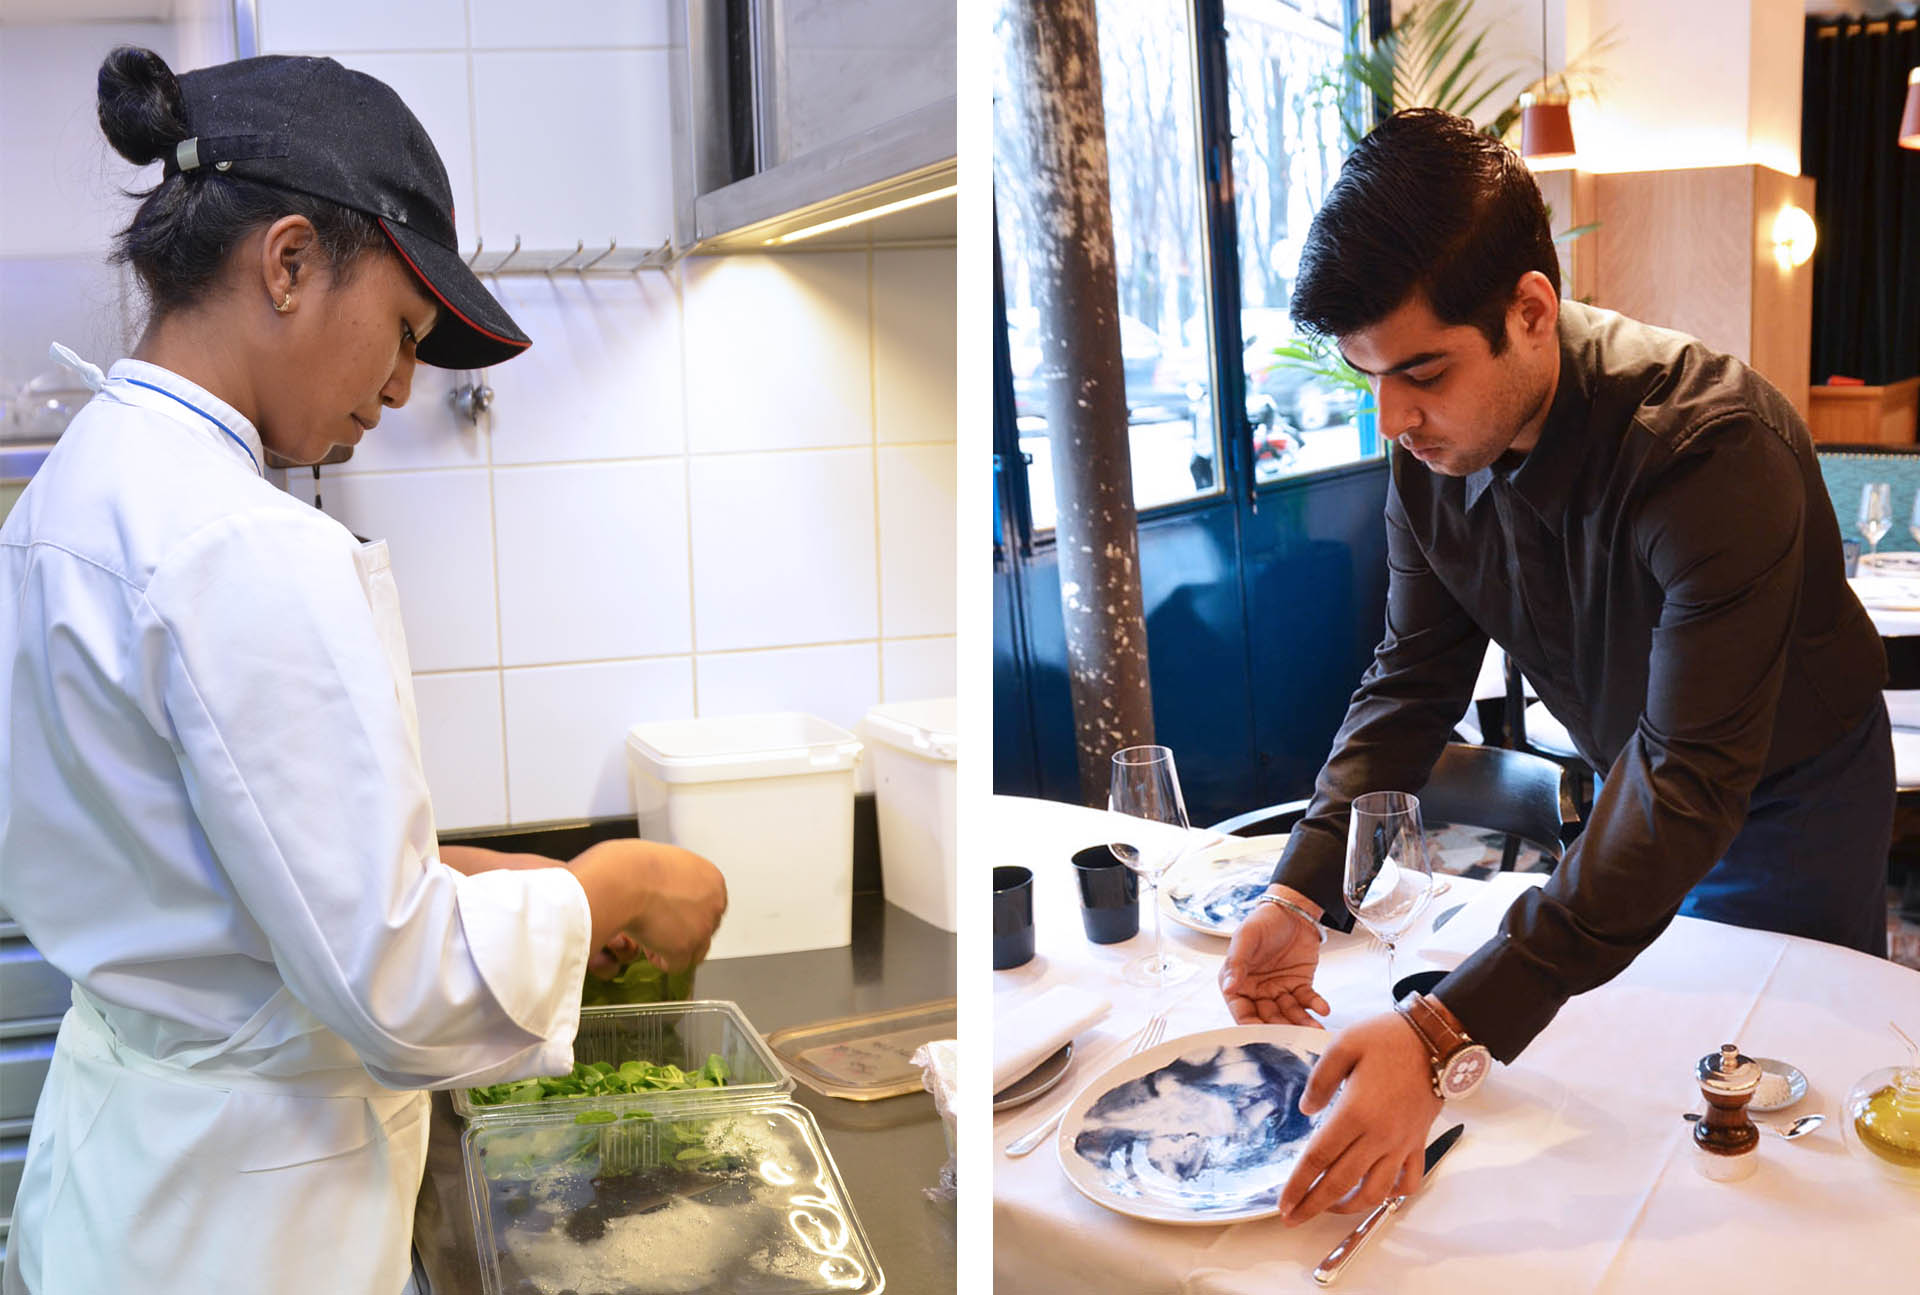 job training at the Divellec restaurant: the life of an intern with Chef Mathieu Pacaud